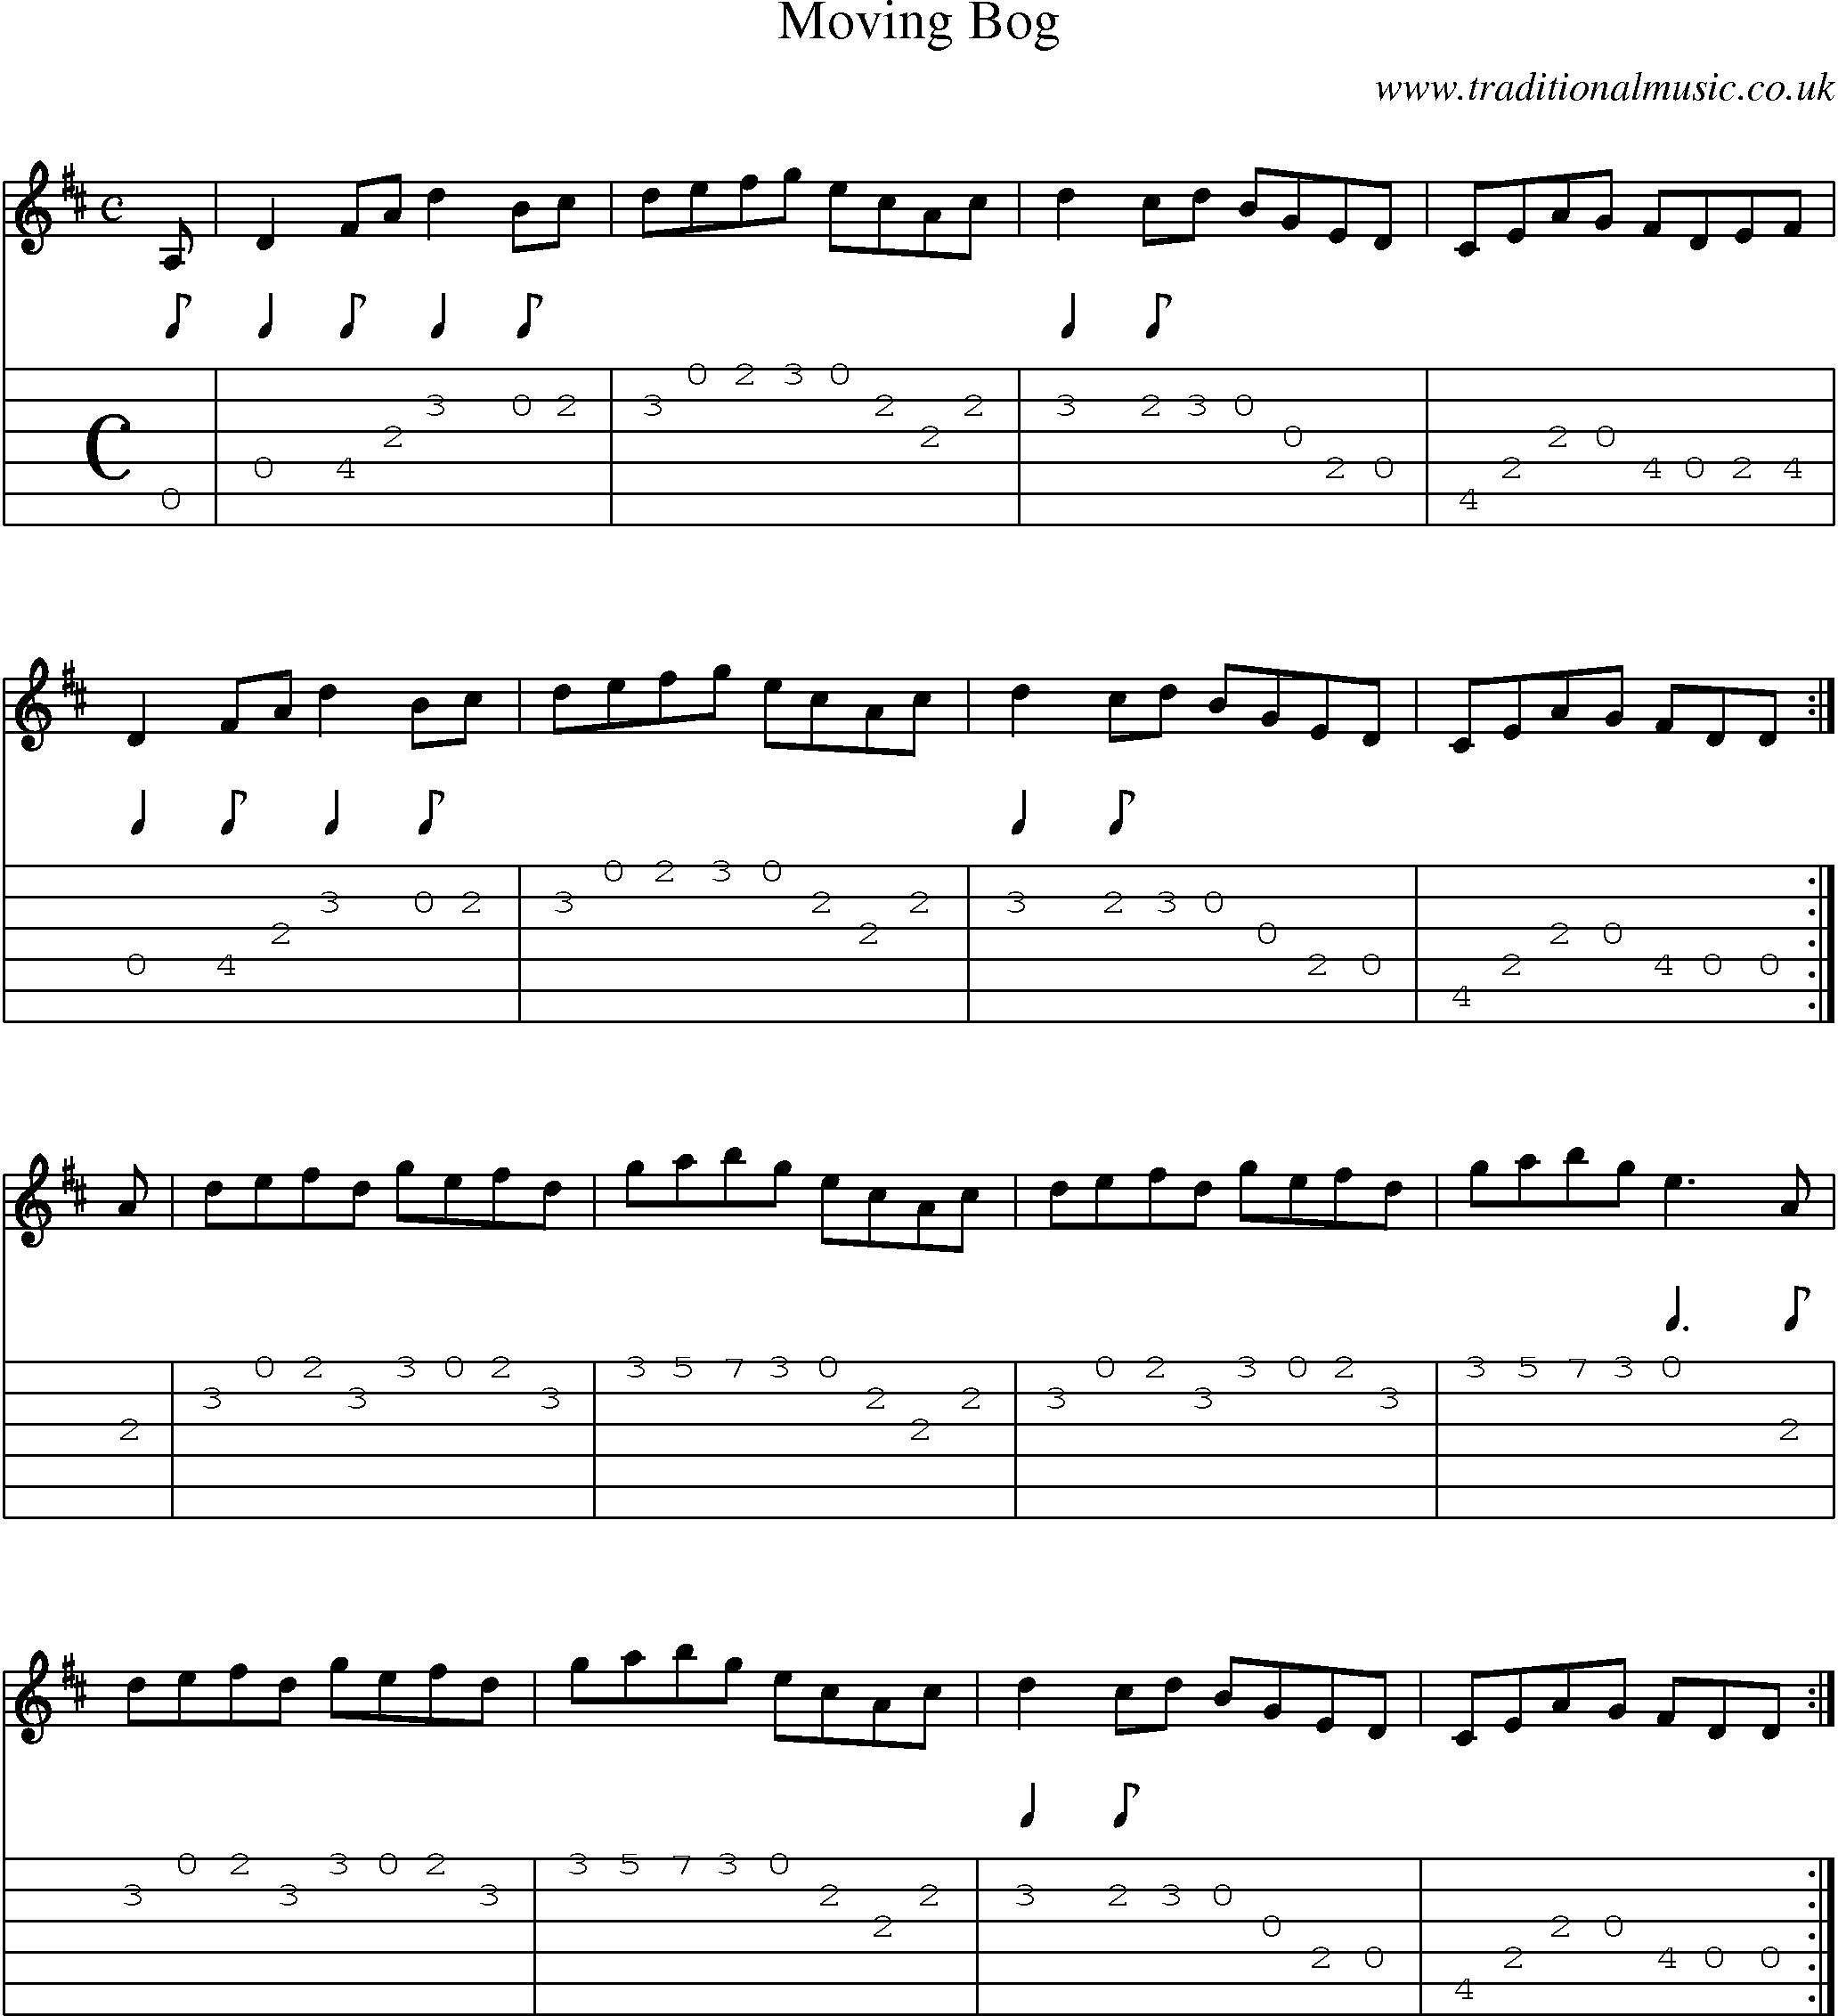 Music Score and Guitar Tabs for Moving Bog